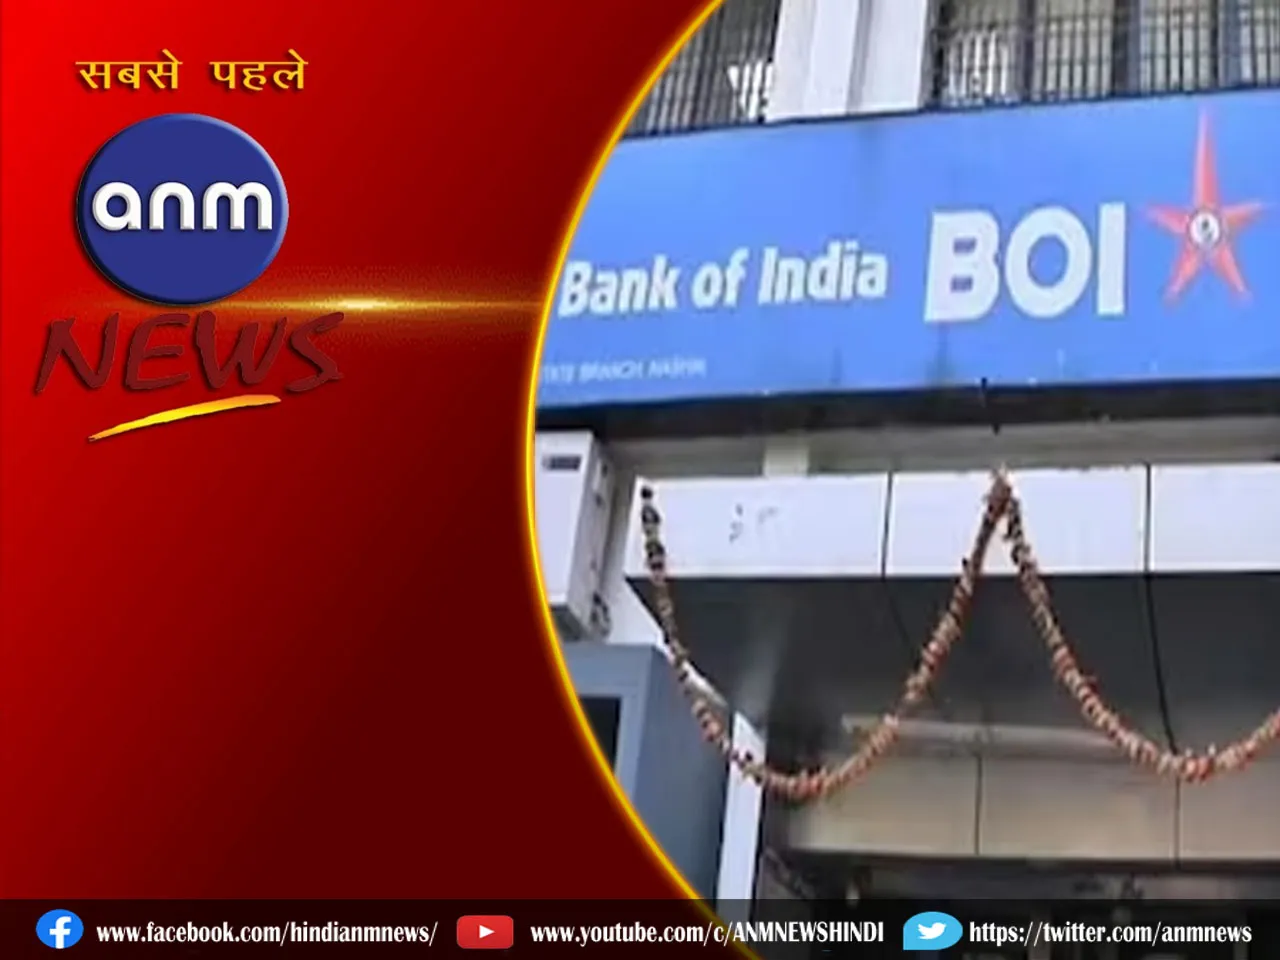 18 bank of india